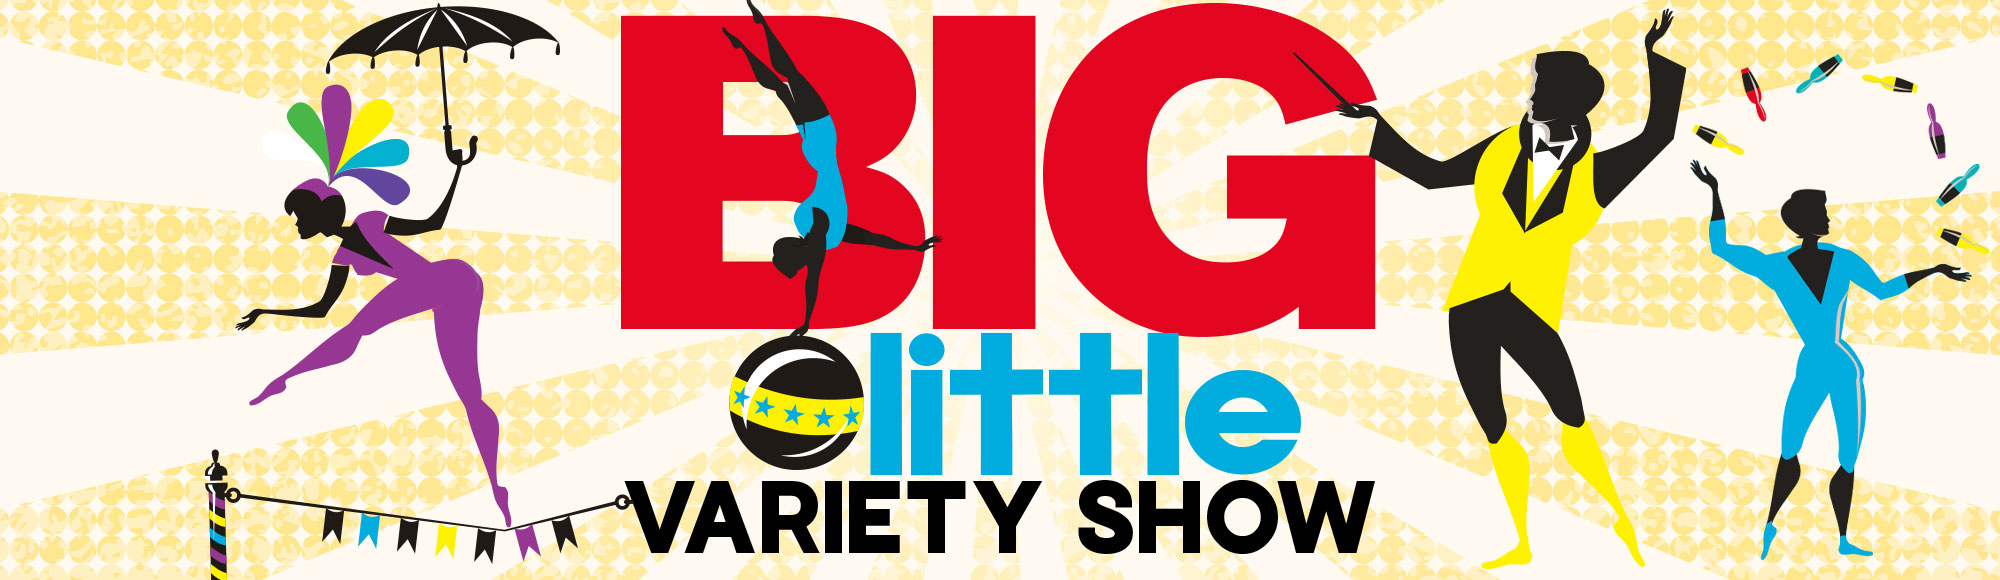 The BIG Little Variety Show show